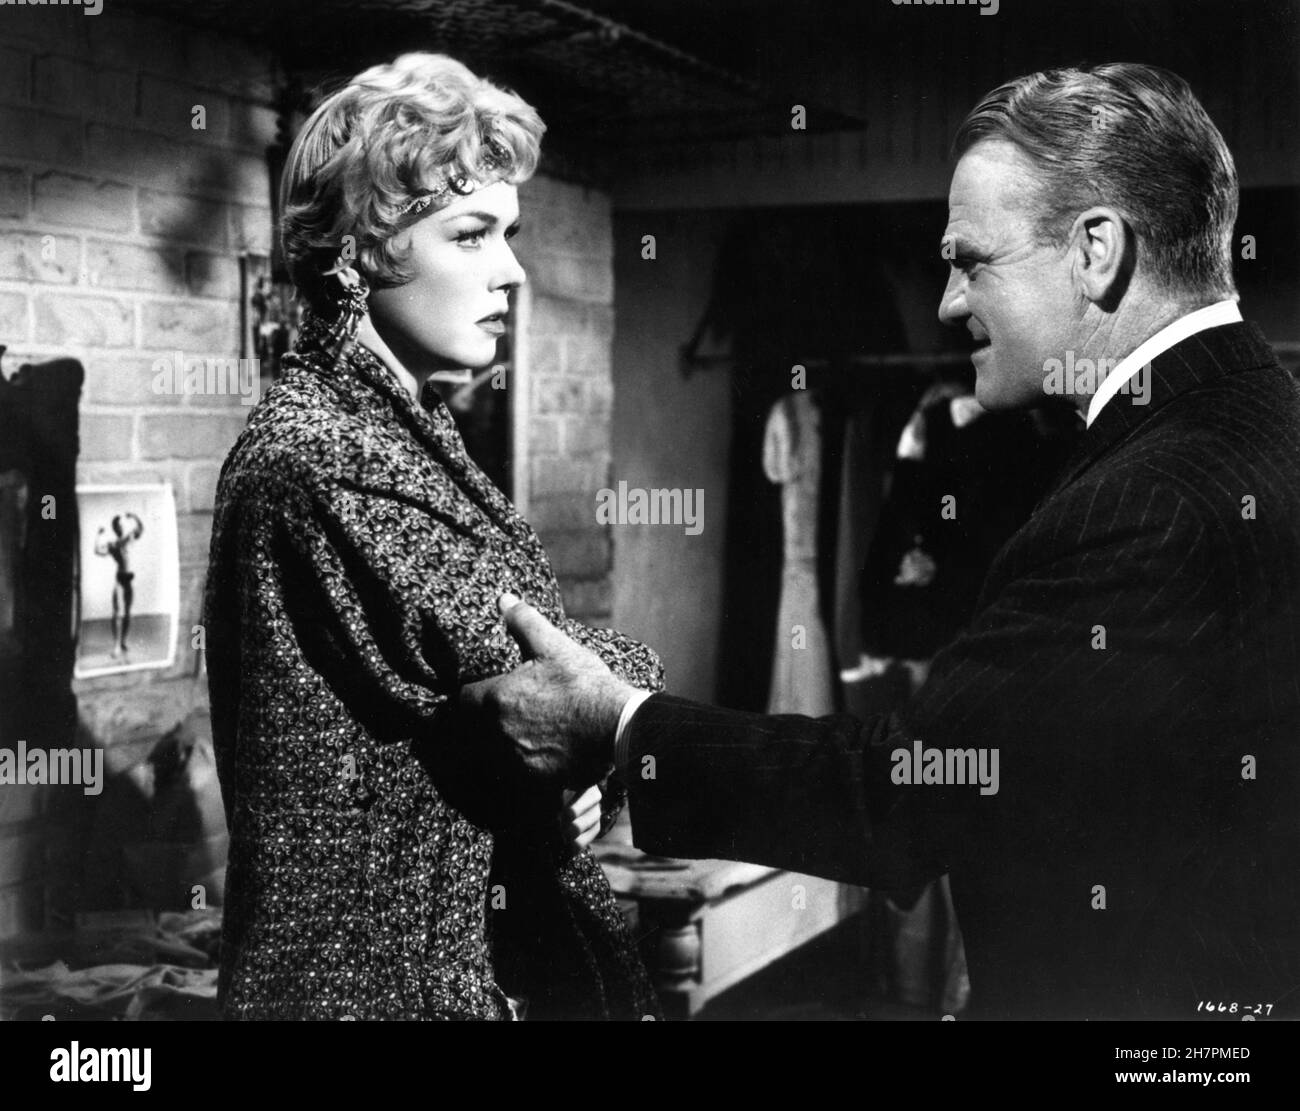 DORIS DAY as Ruth Etting and JAMES CAGNEY as gangster Marty Snyder in LOVE ME OR LEAVE ME 1955 director CHARLES VIDOR costume design Helen Rose producer Joe Pasternak Metro Goldwyn Mayer Stock Photo